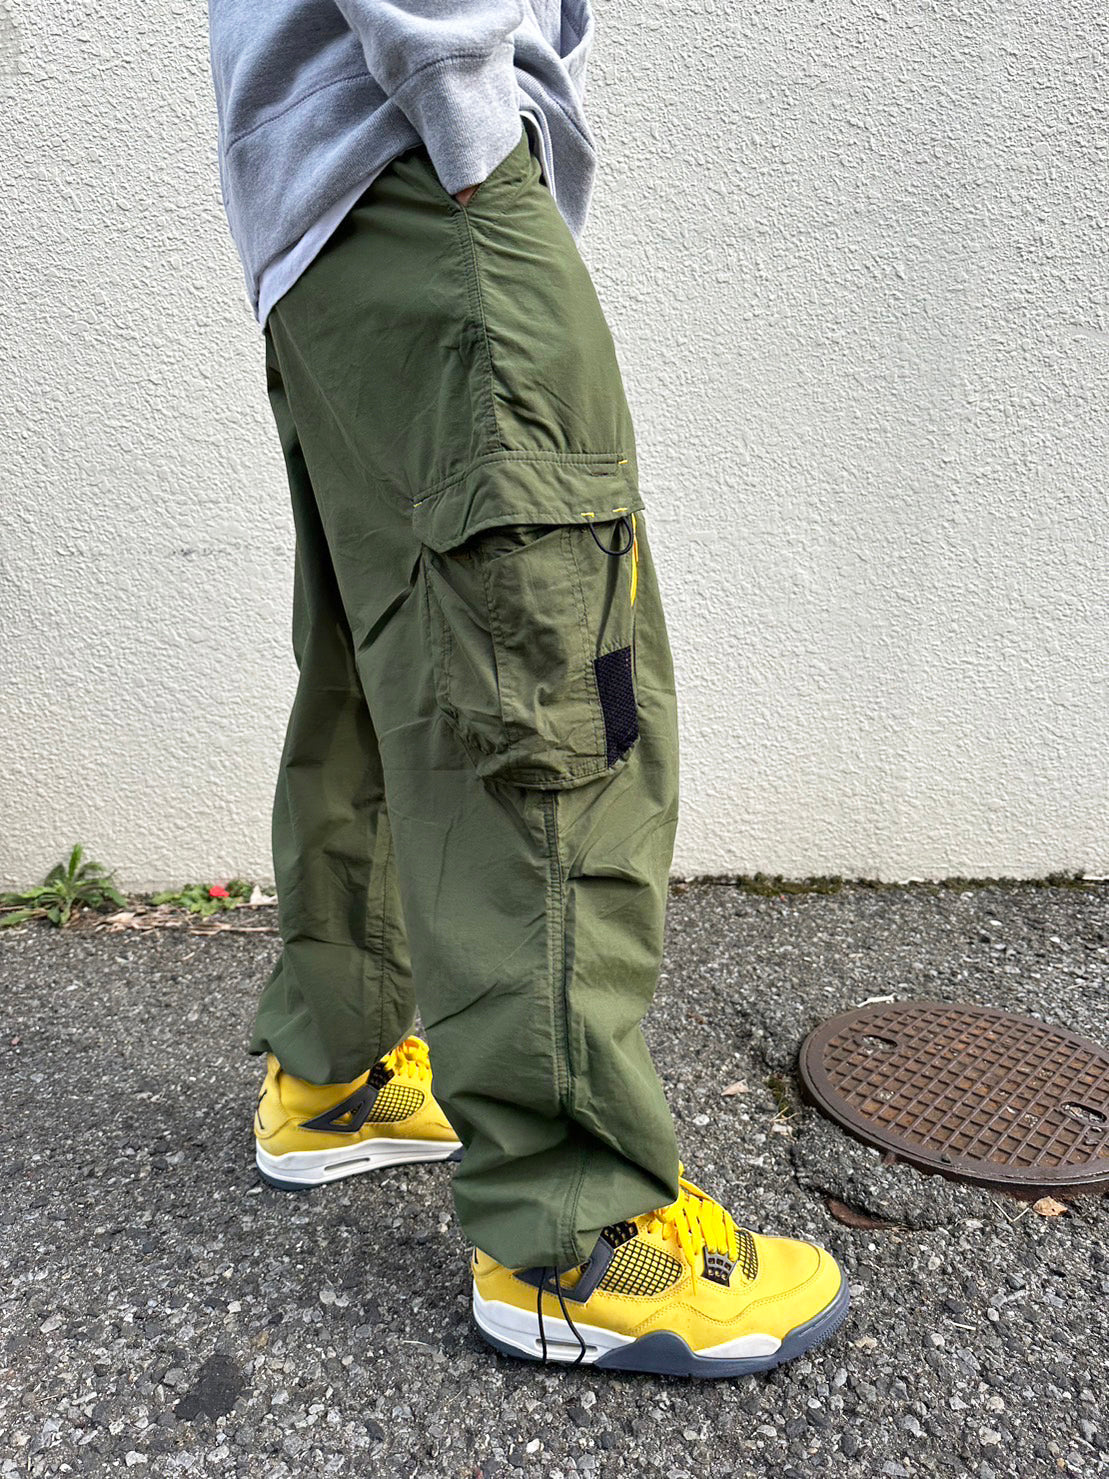 【Dead Stock】 90's sessions surf skate cargo pants (size:34inch)